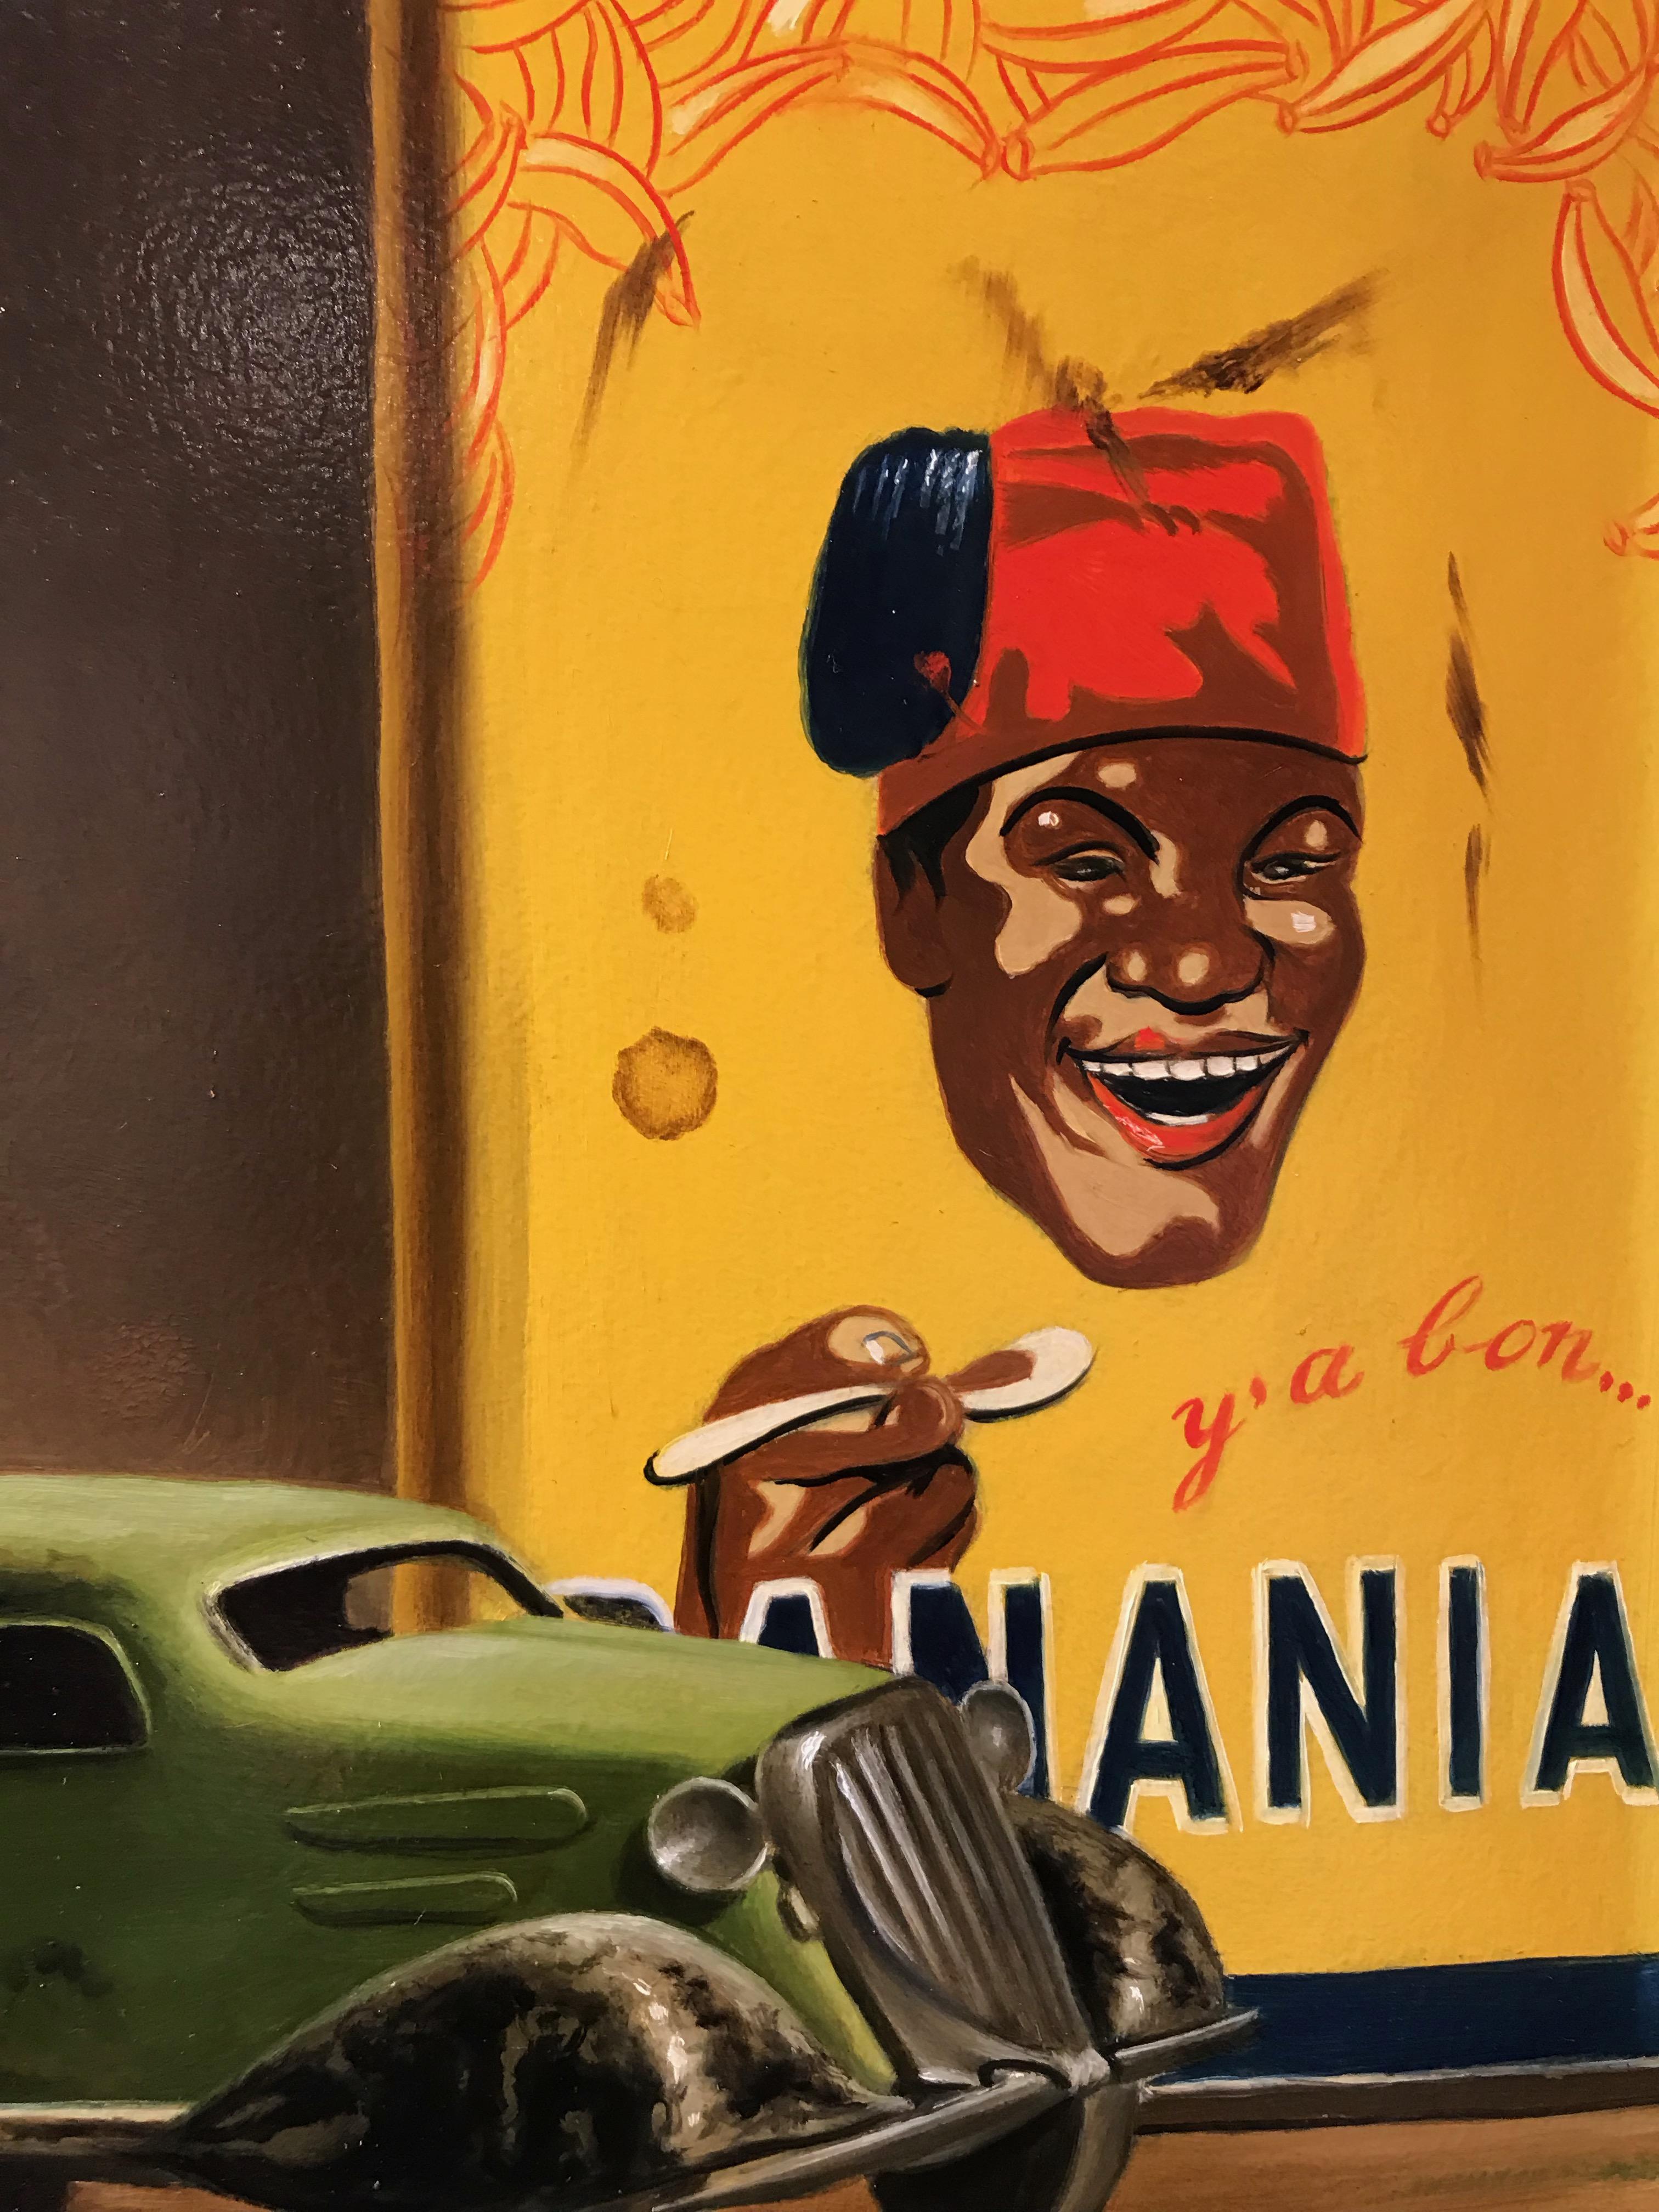 Toy Car and Banania Tin - Realist Painting by Stefaan Eyckmans